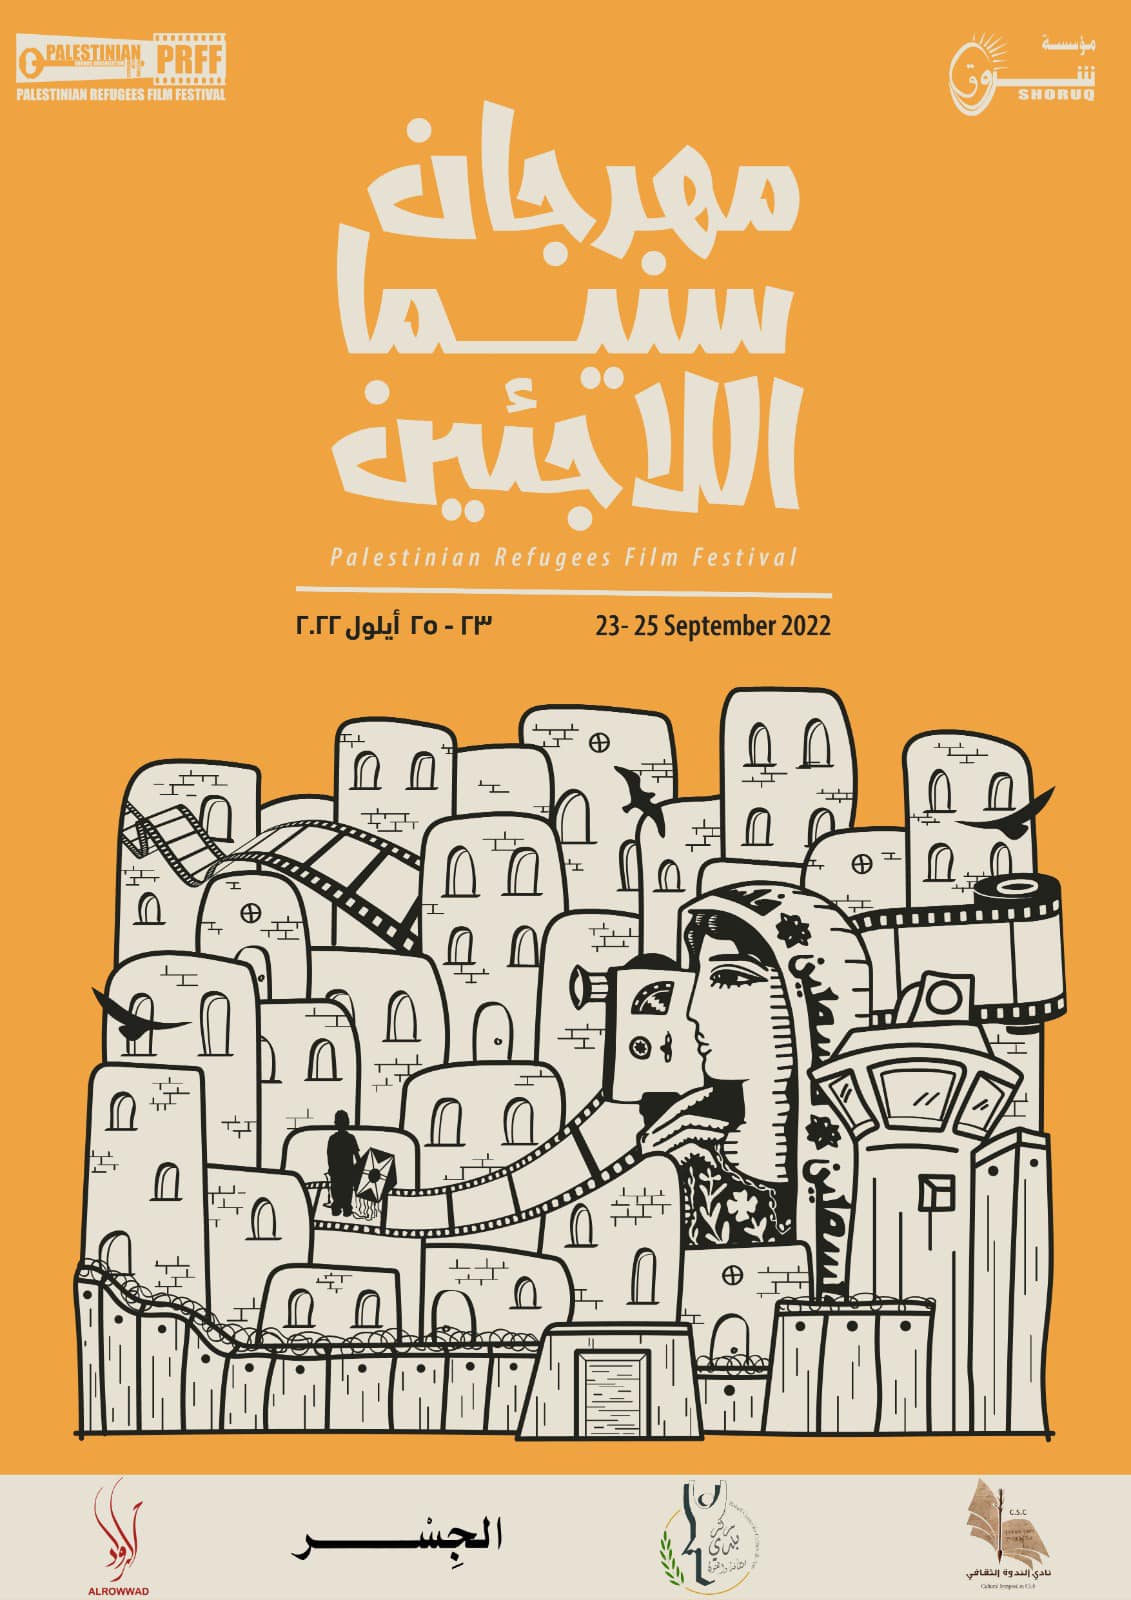 Shoruq Organization launches the Palestinian Refugee Film Festival (PRFF) in its third edition this year: